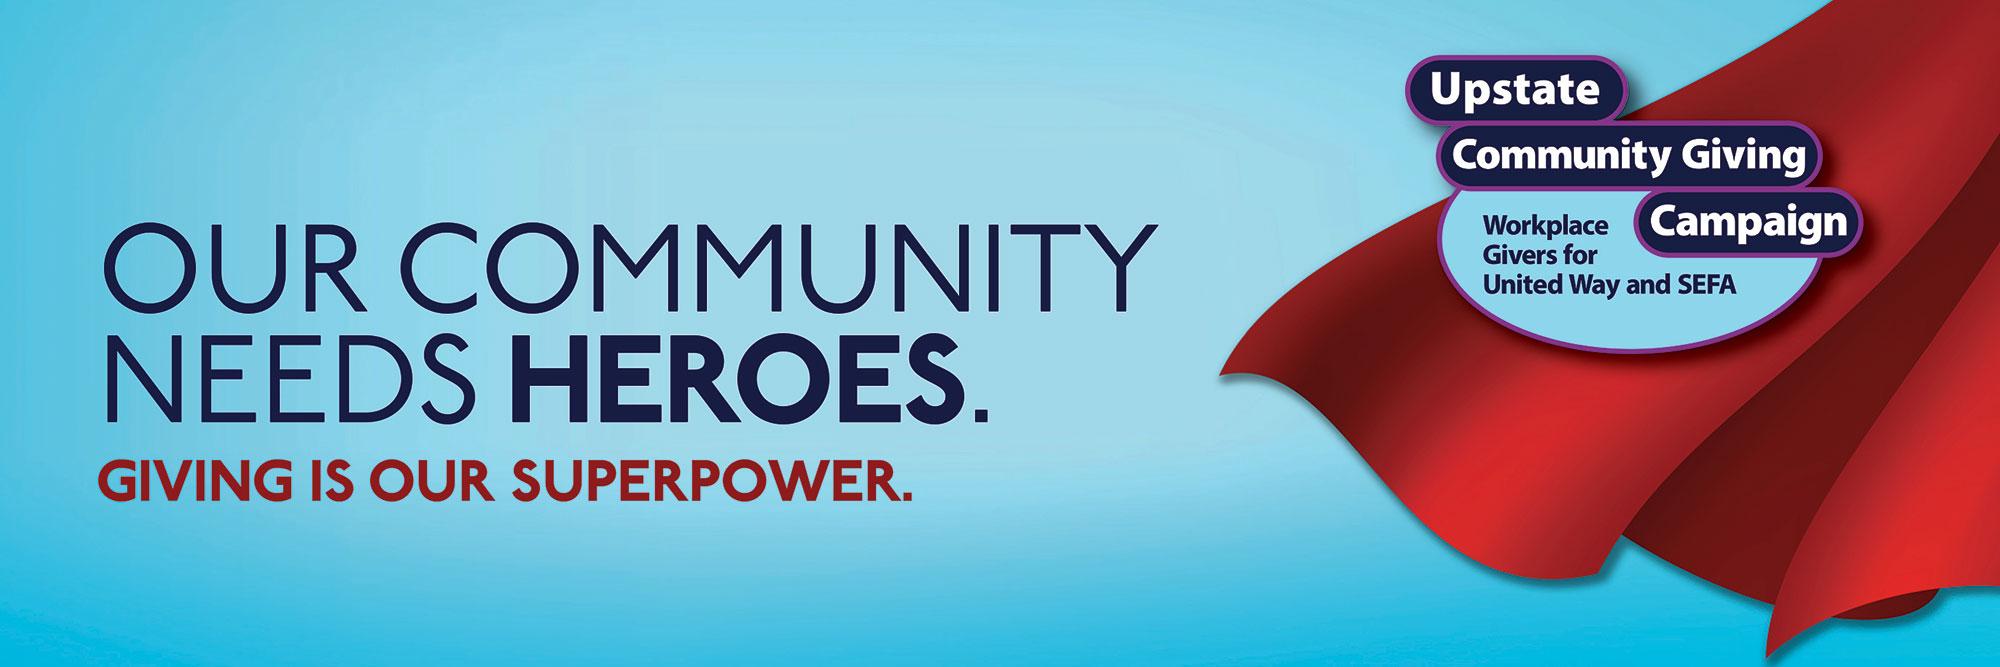 Community Giving Campaign - Our Community Needs Heroes - Giving Is Your Superpower